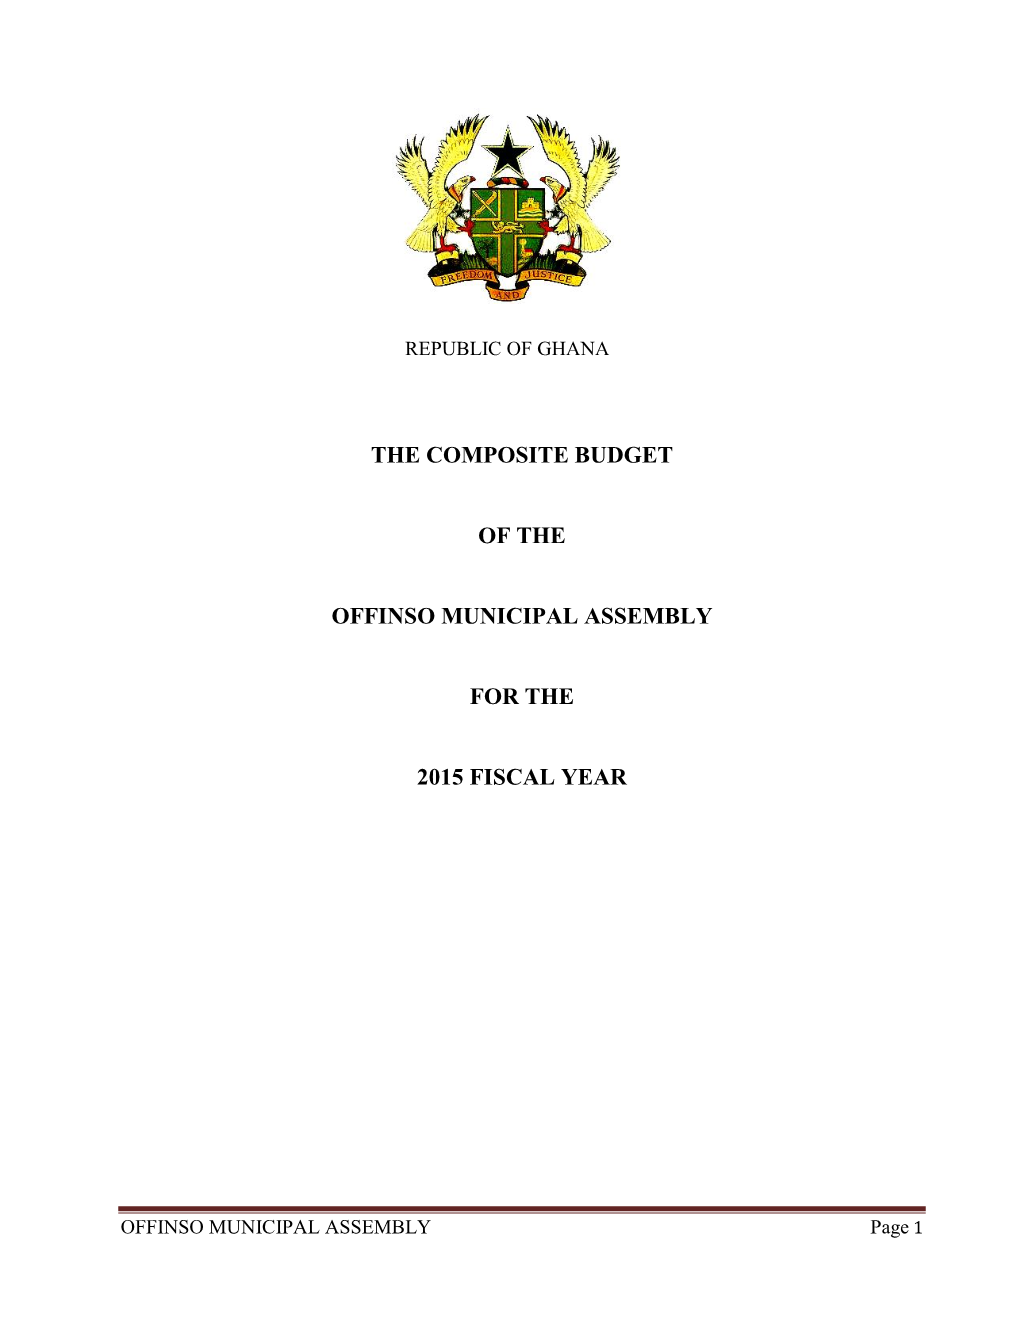 The Composite Budget of the Offinso Municipal Assembly for the 2015